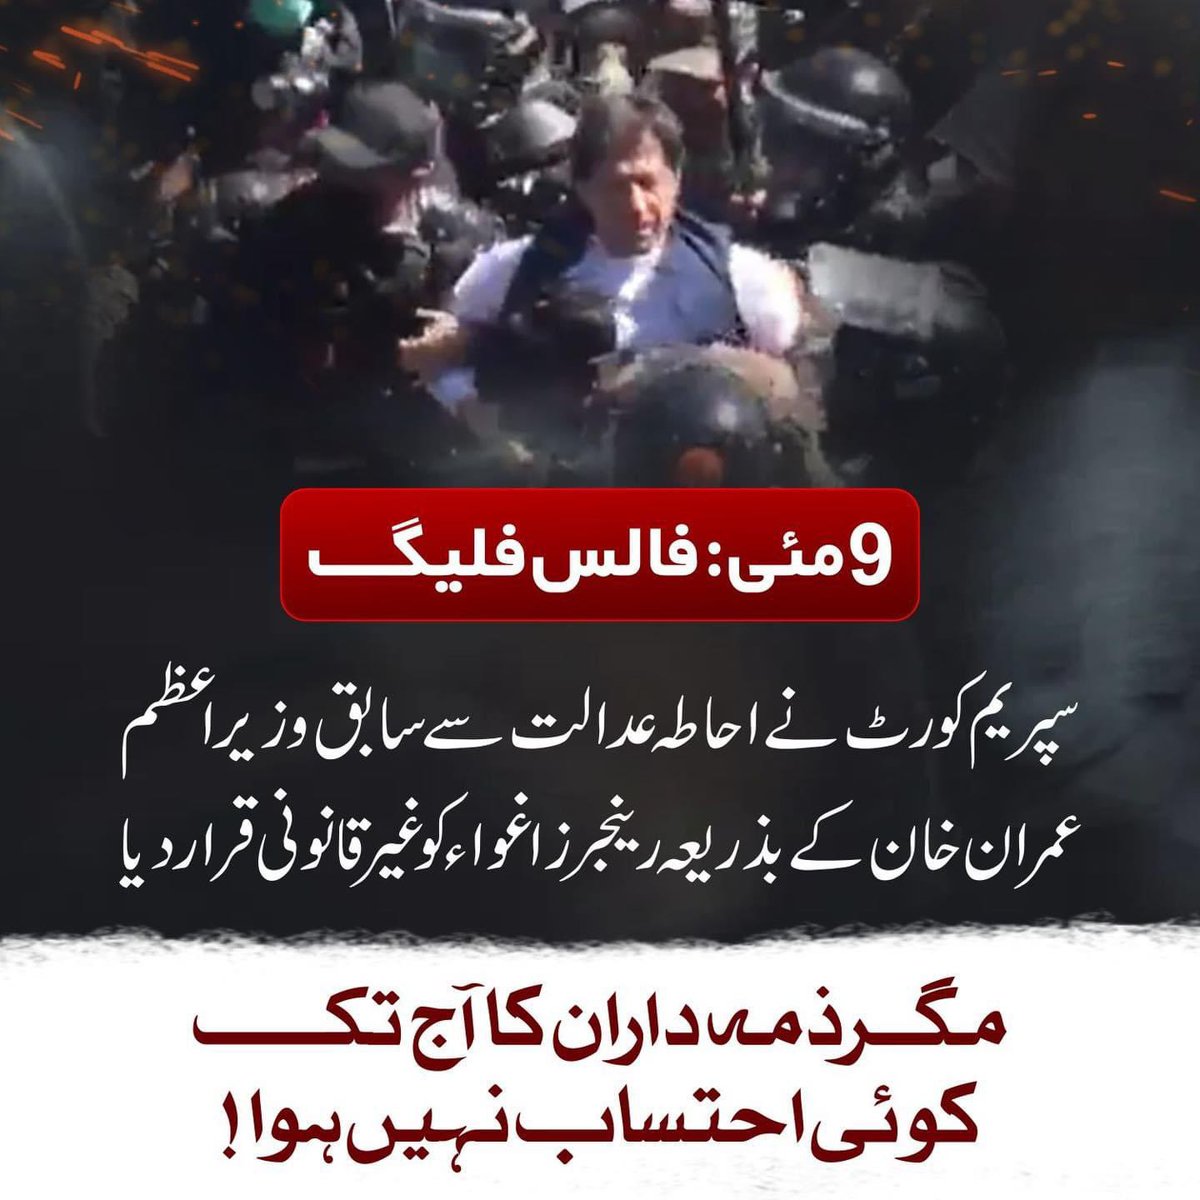 The Supreme Court ruled that the abduction of former Prime Minister Imran Khan by the Rangers from the court premises was unlawful, yet those responsible for this illegal act have still not been held accountable and brought to justice. #نو_مئی_بہانہ_PTI_نشانہ